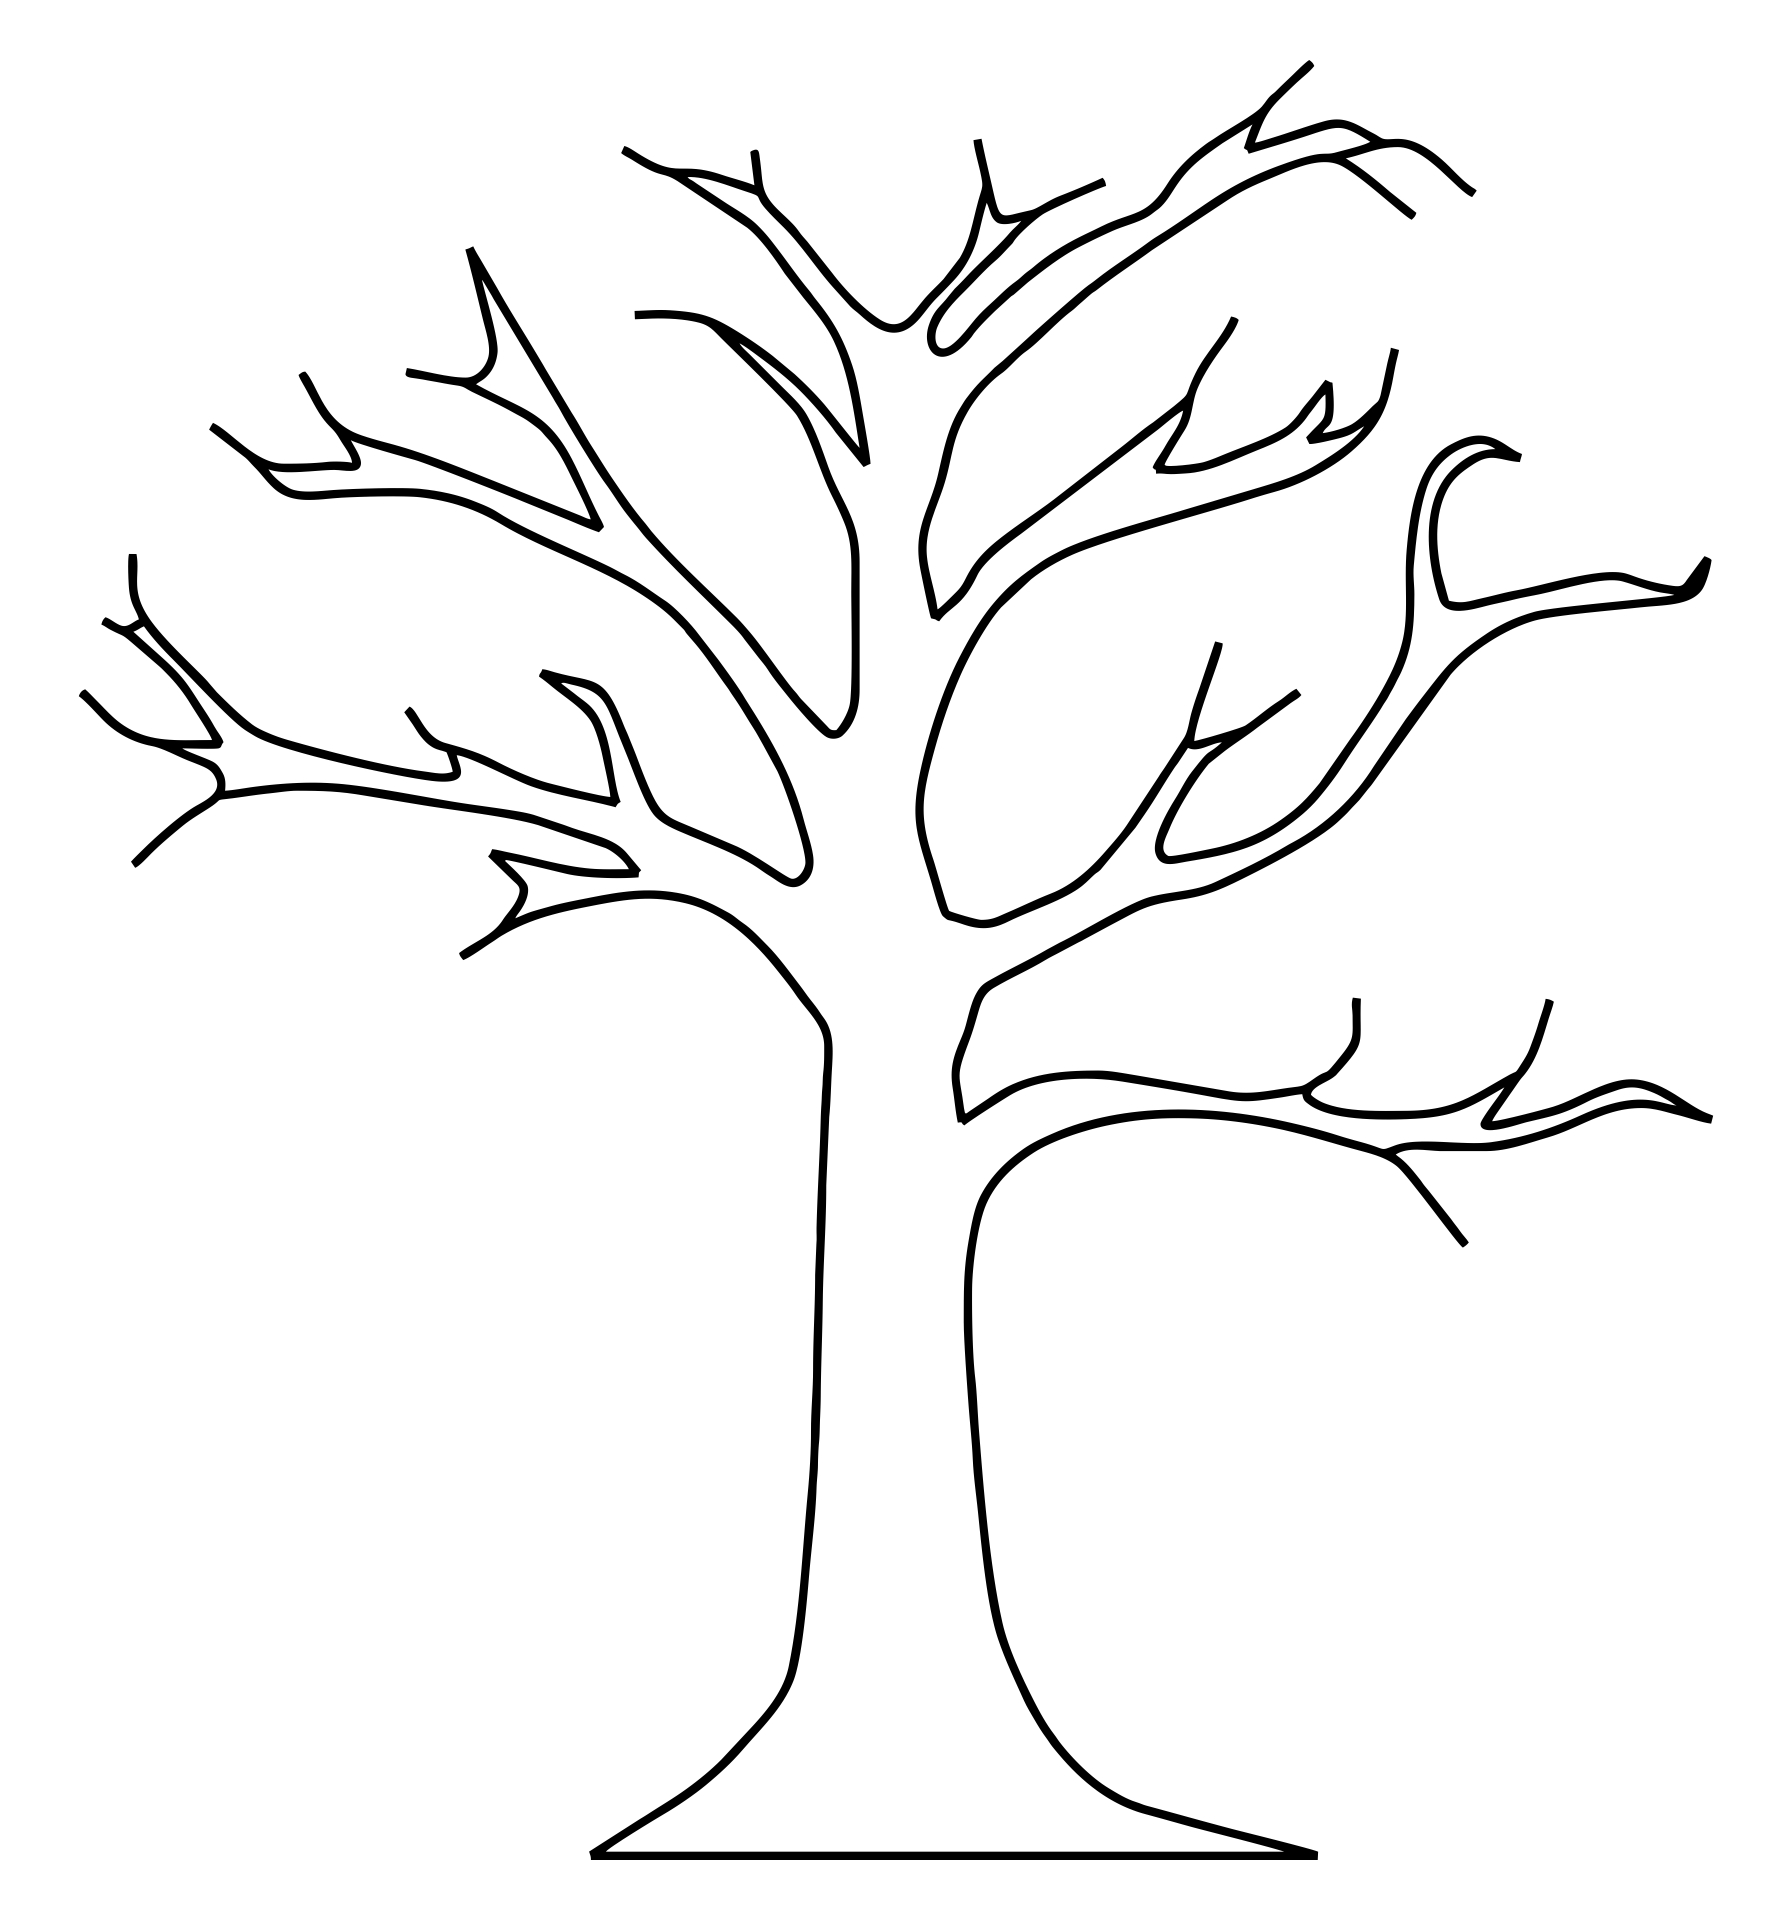 Tree Trunk Coloring Page Pattern